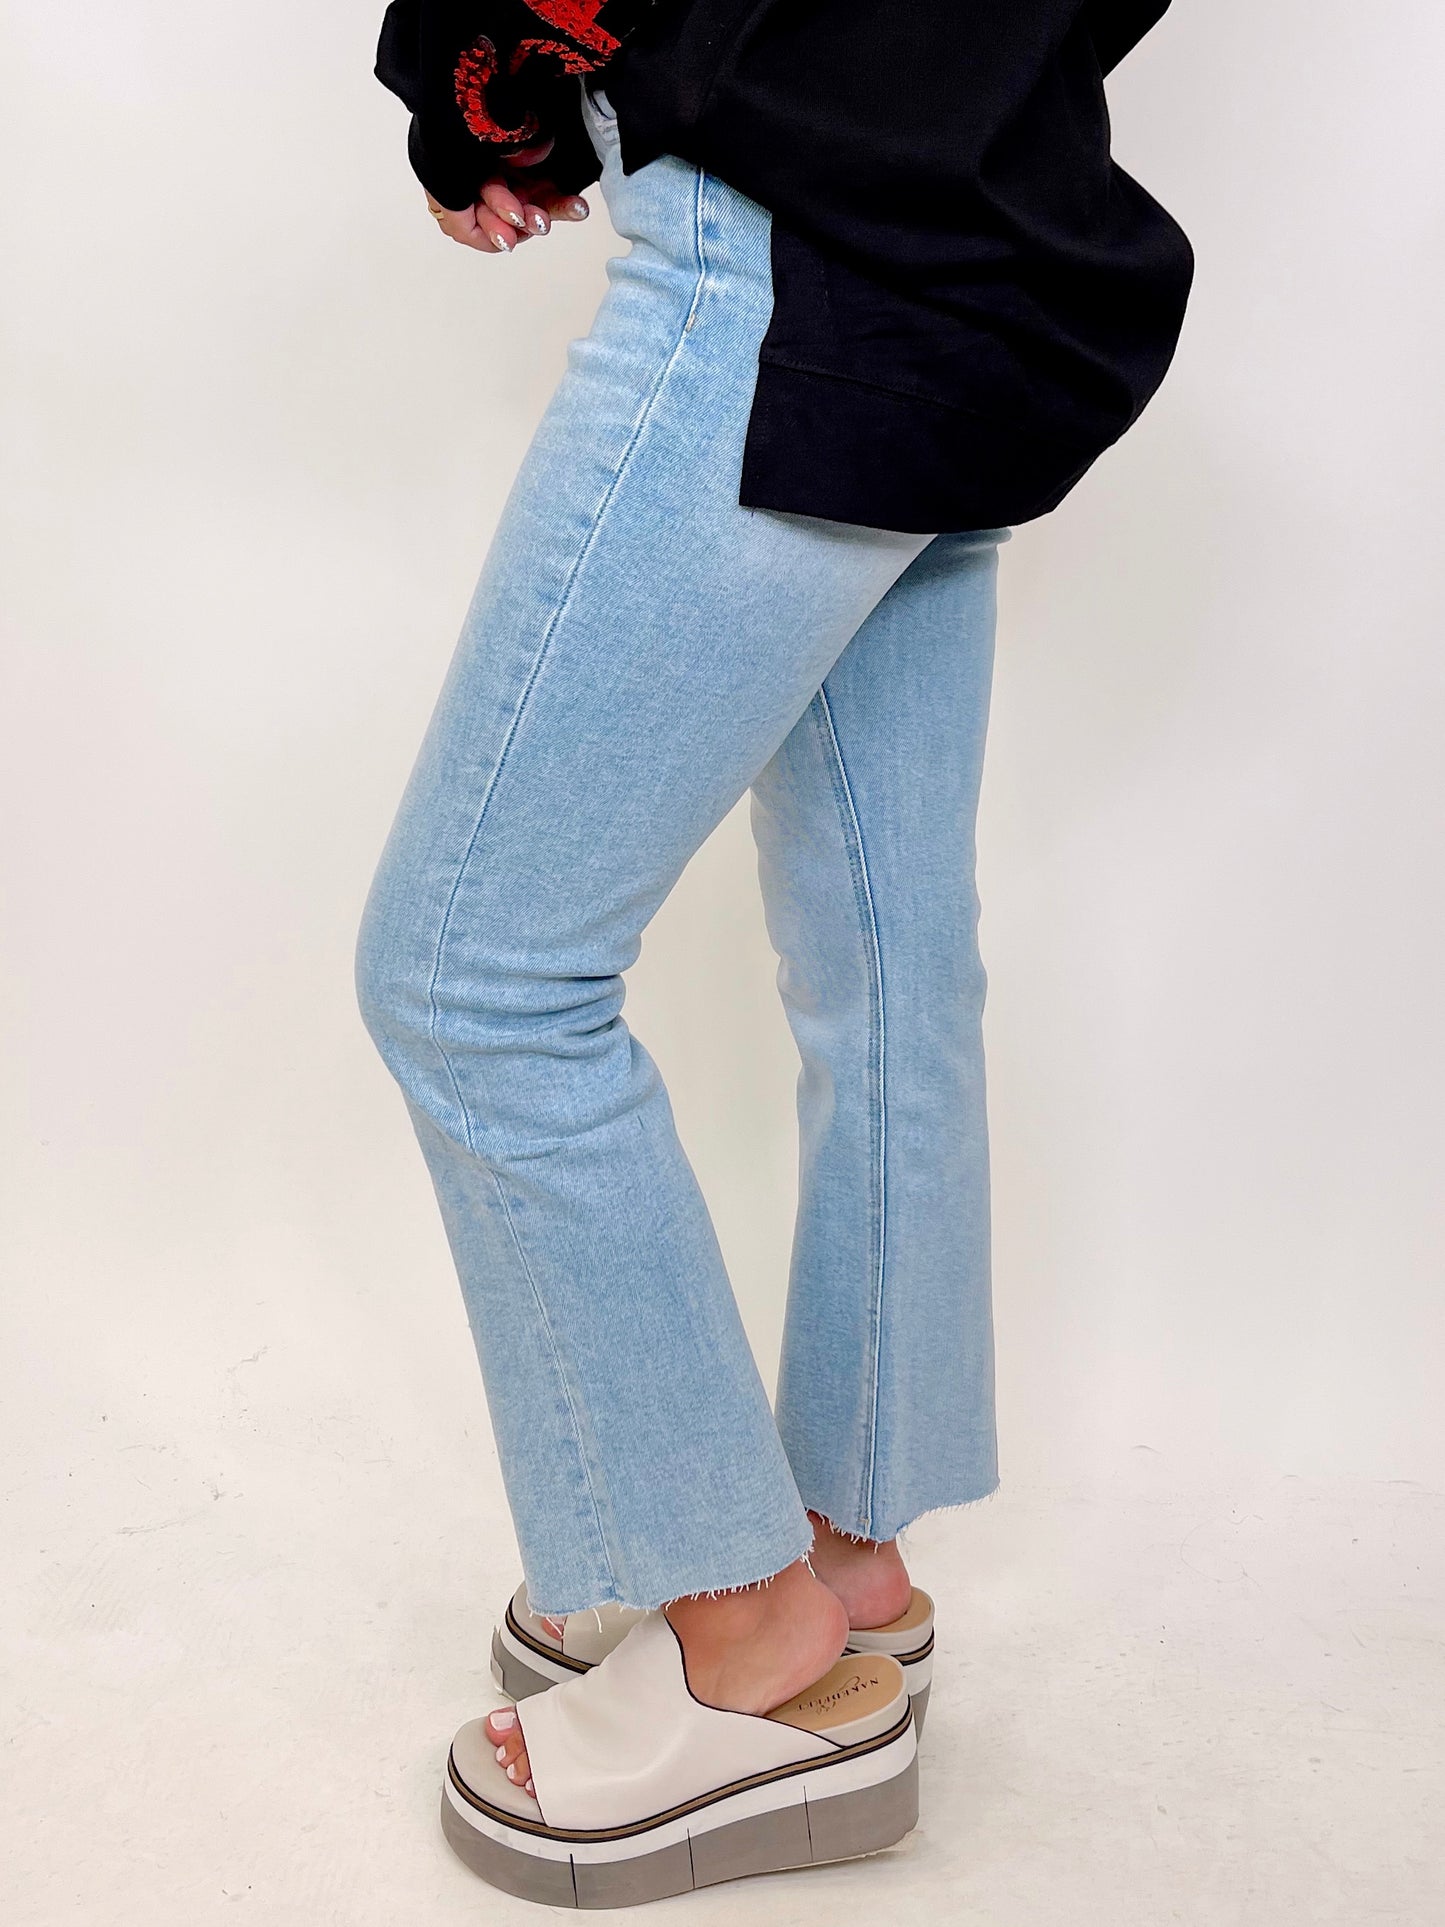 The Madilyn Jeans-Jeans-Vervet-The Village Shoppe, Women’s Fashion Boutique, Shop Online and In Store - Located in Muscle Shoals, AL.